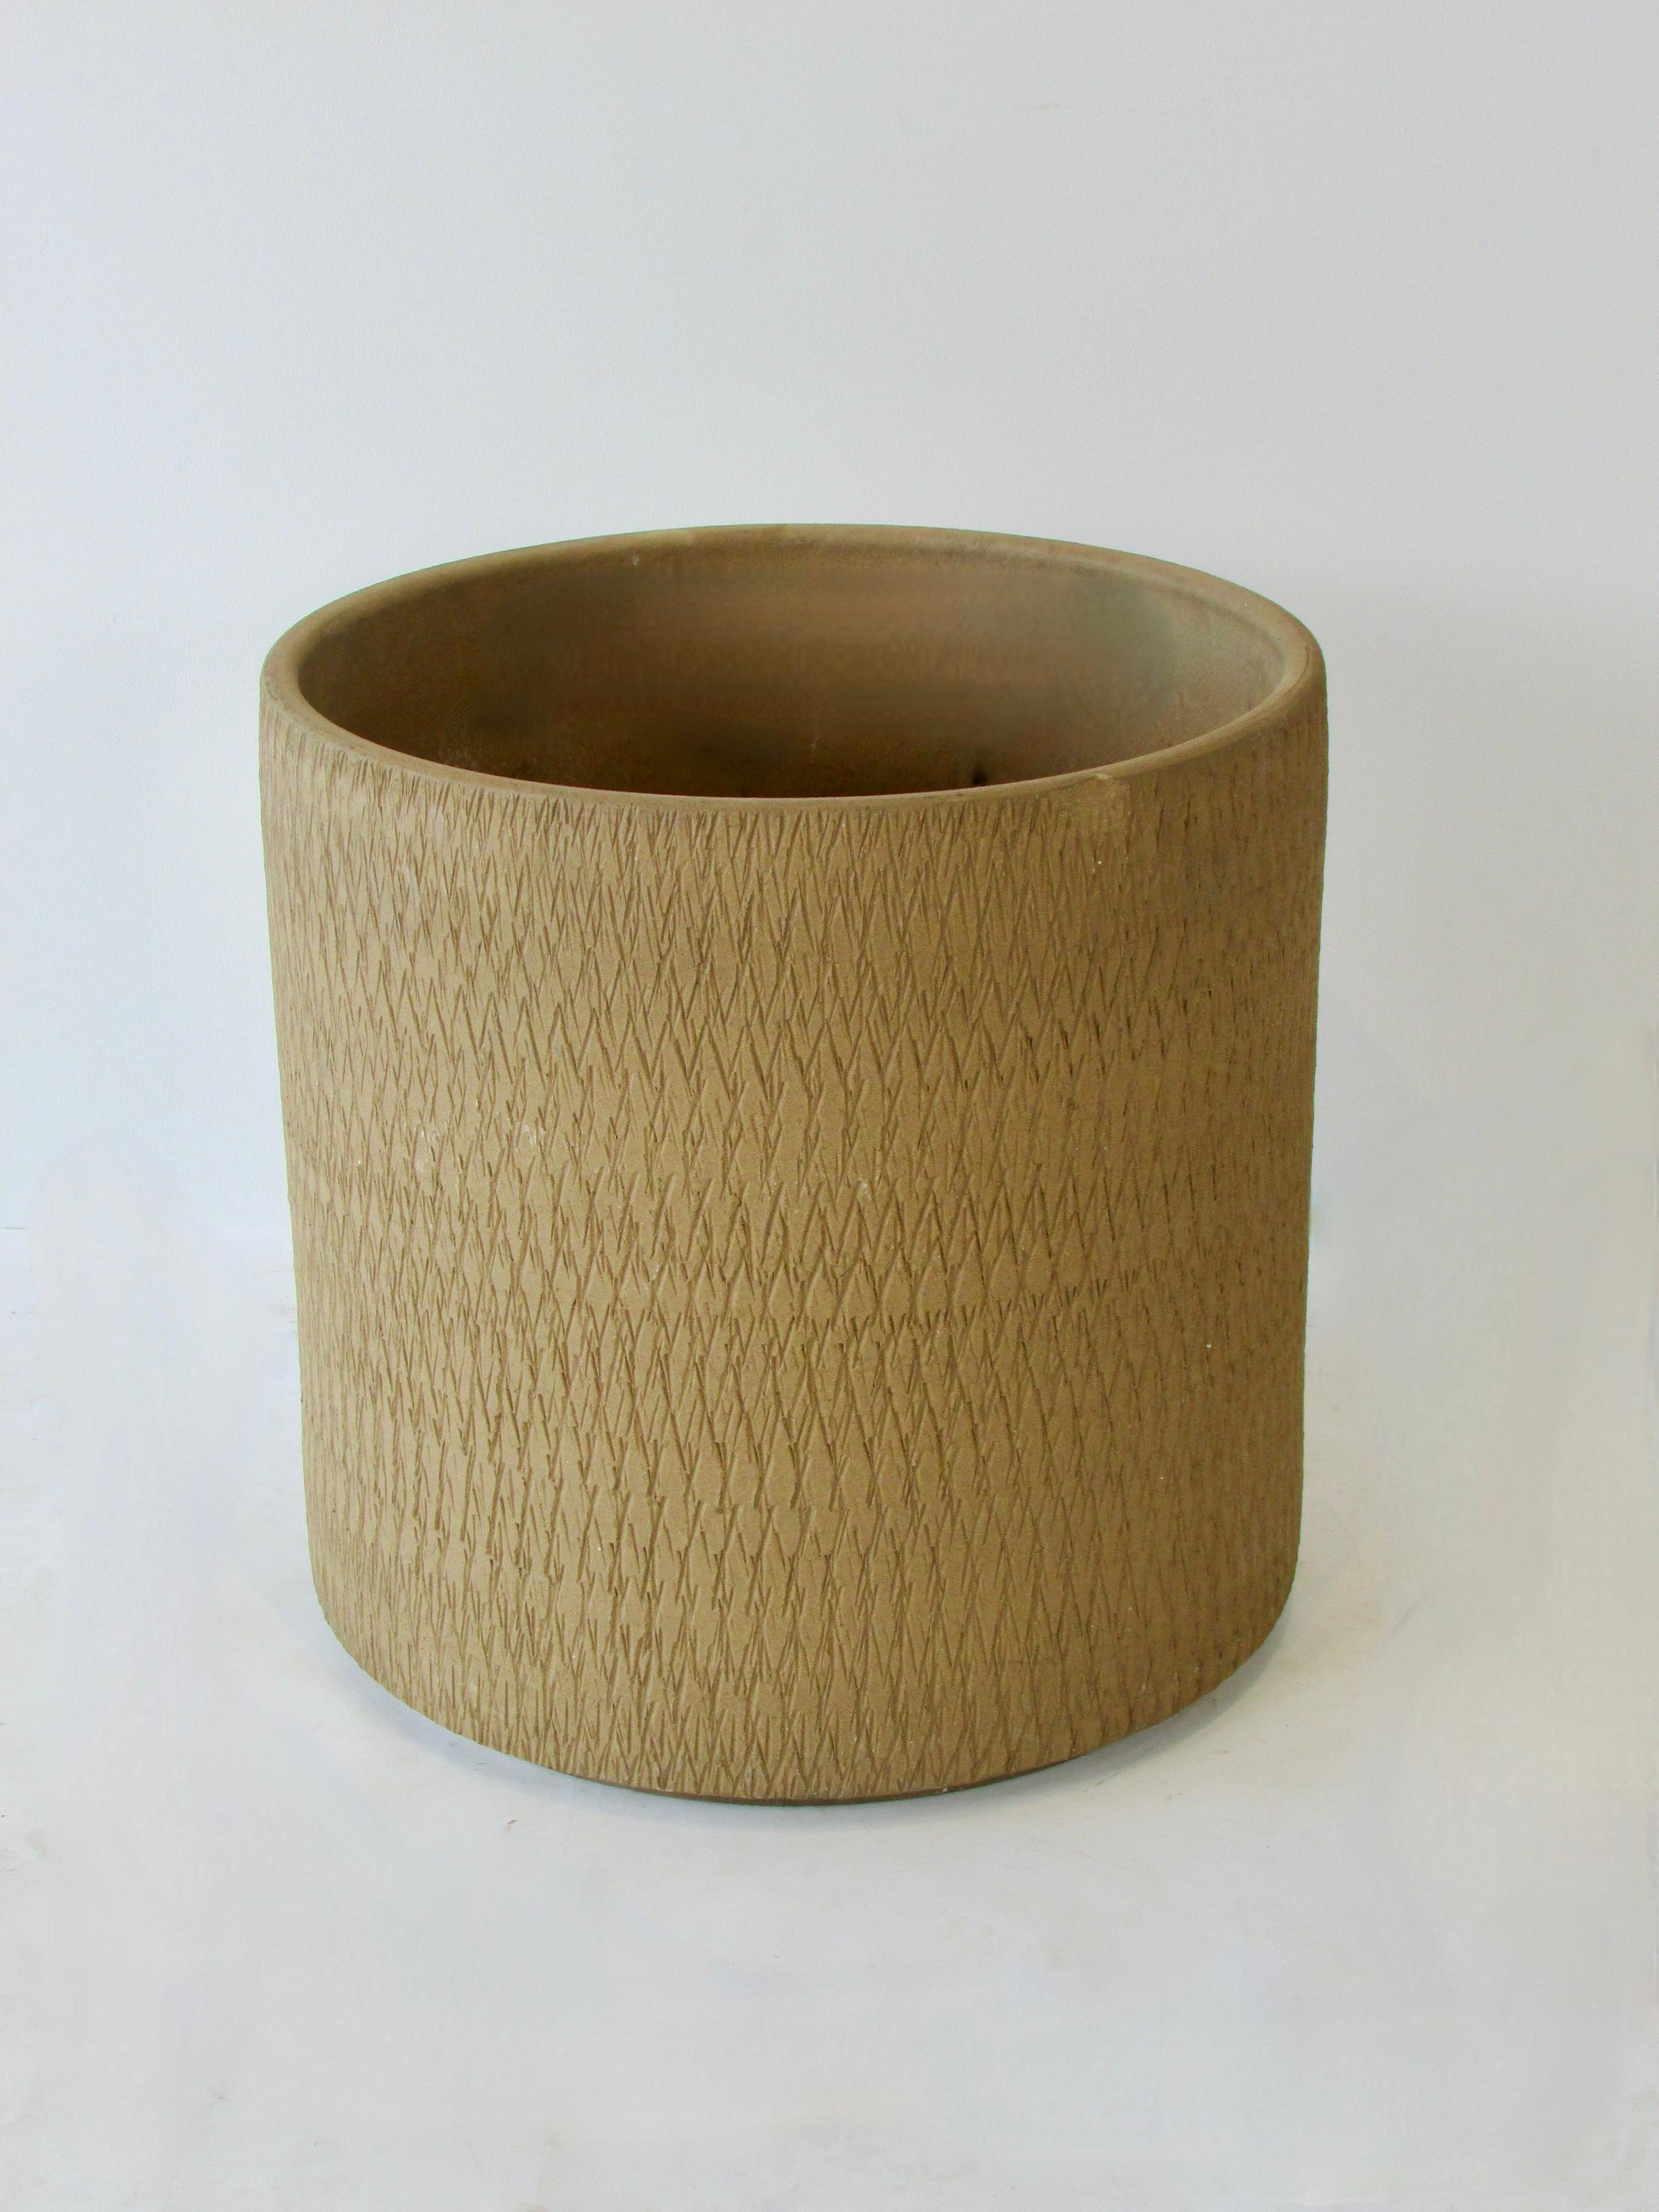 American Large Earth Tone Gainey Planter Pot with Organic Sgrafitto Design